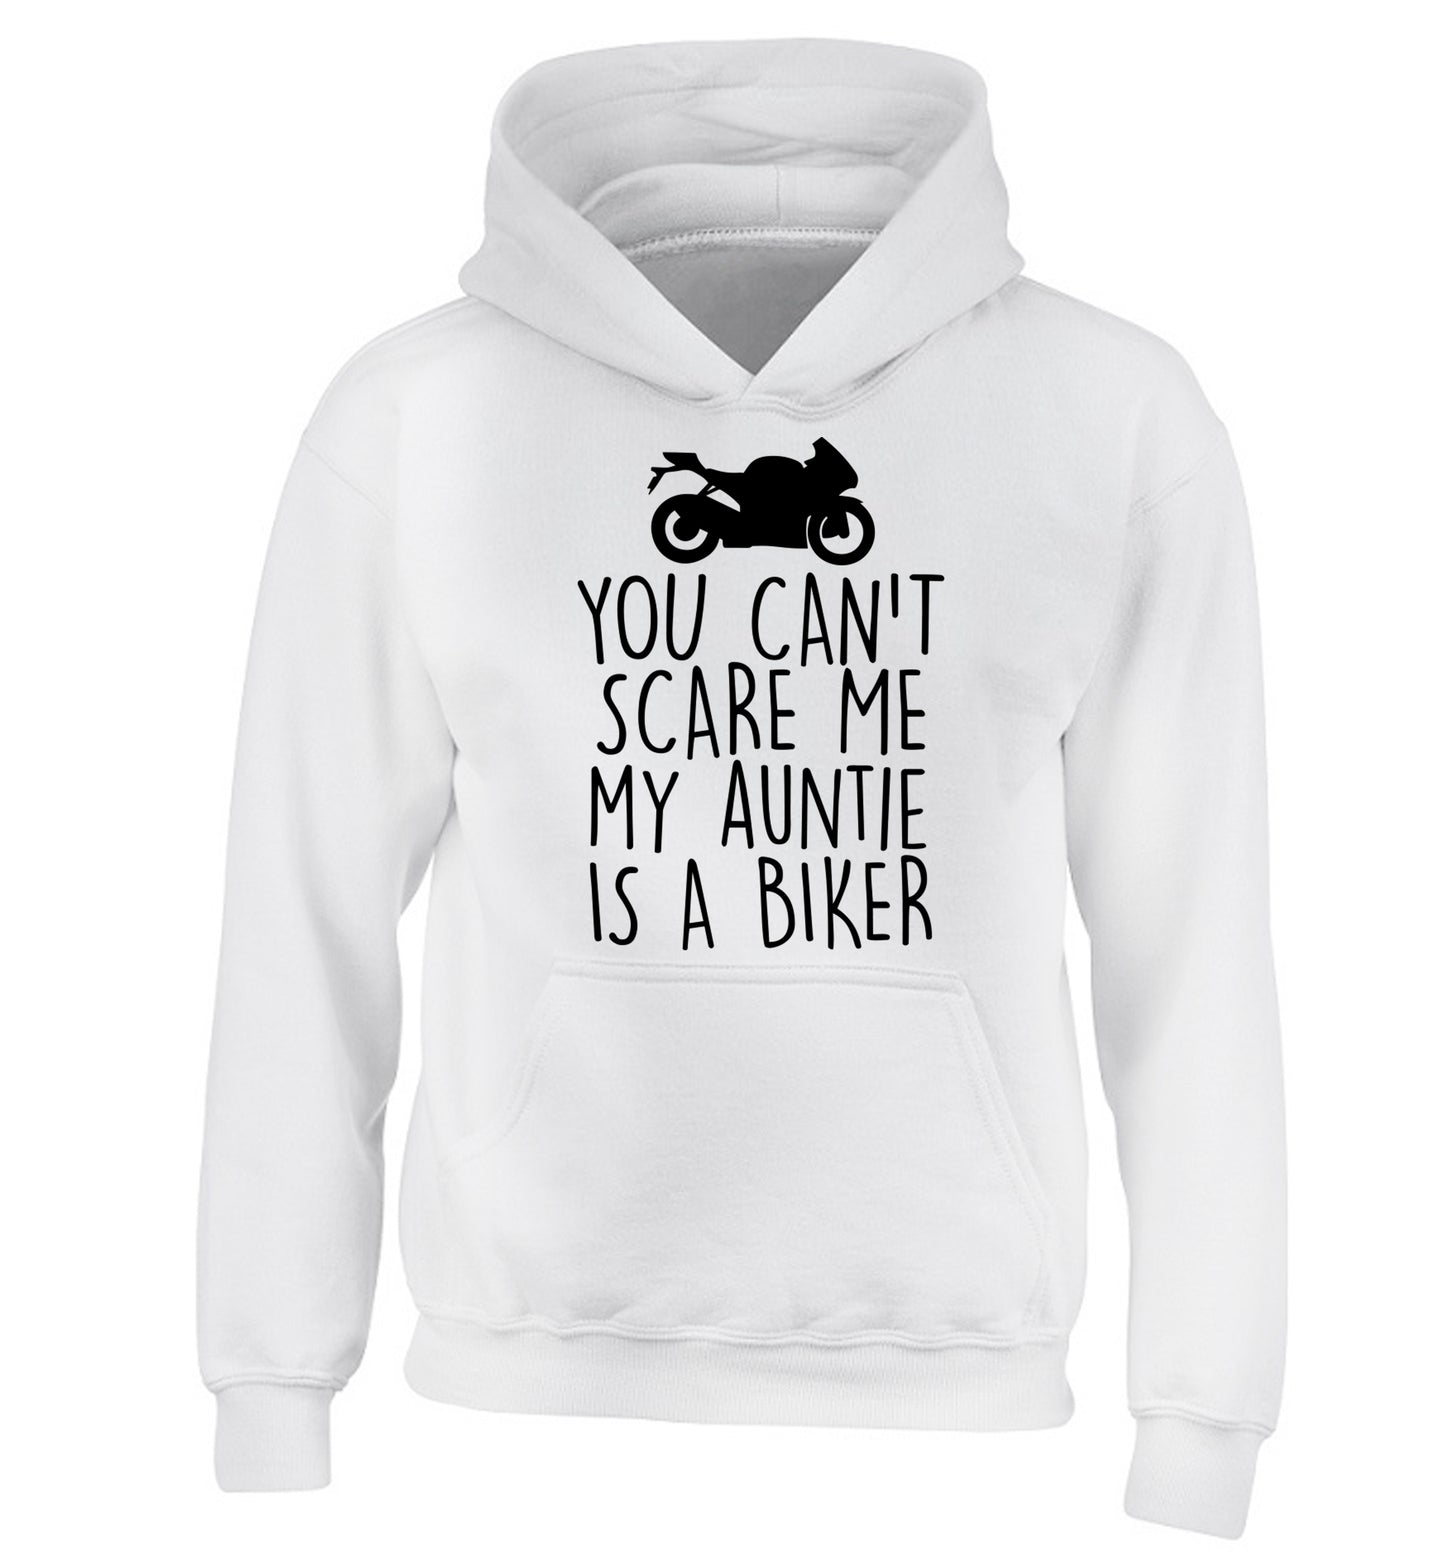 You can't scare me my auntie is a biker children's white hoodie 12-13 Years